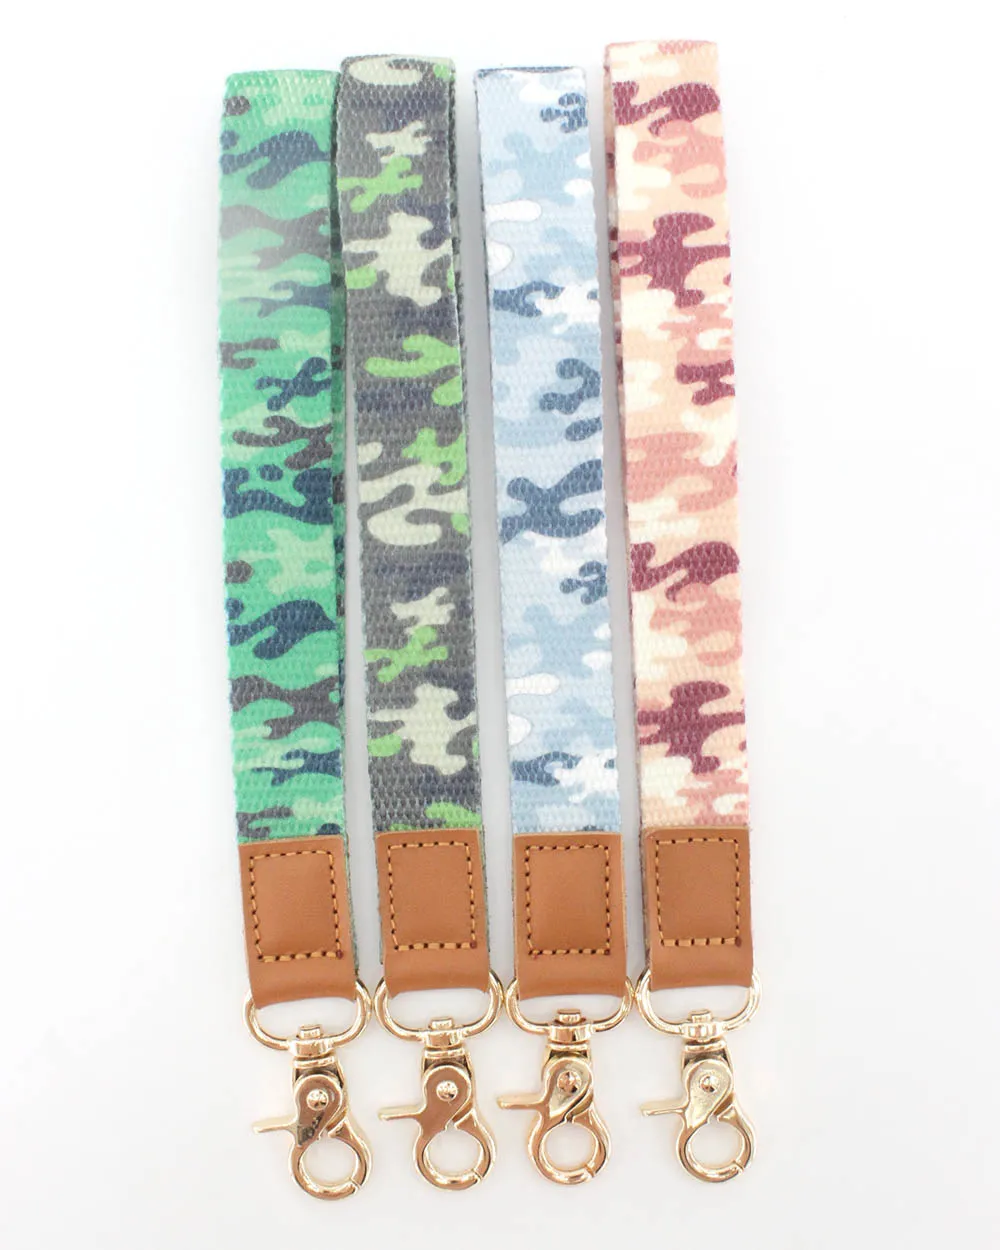 10pcs Keychains Wrist Lanyard Camouflage Strap Band Lobster clasp Key Chain Holder Hand For Girls/Women/Men Wholesale New design